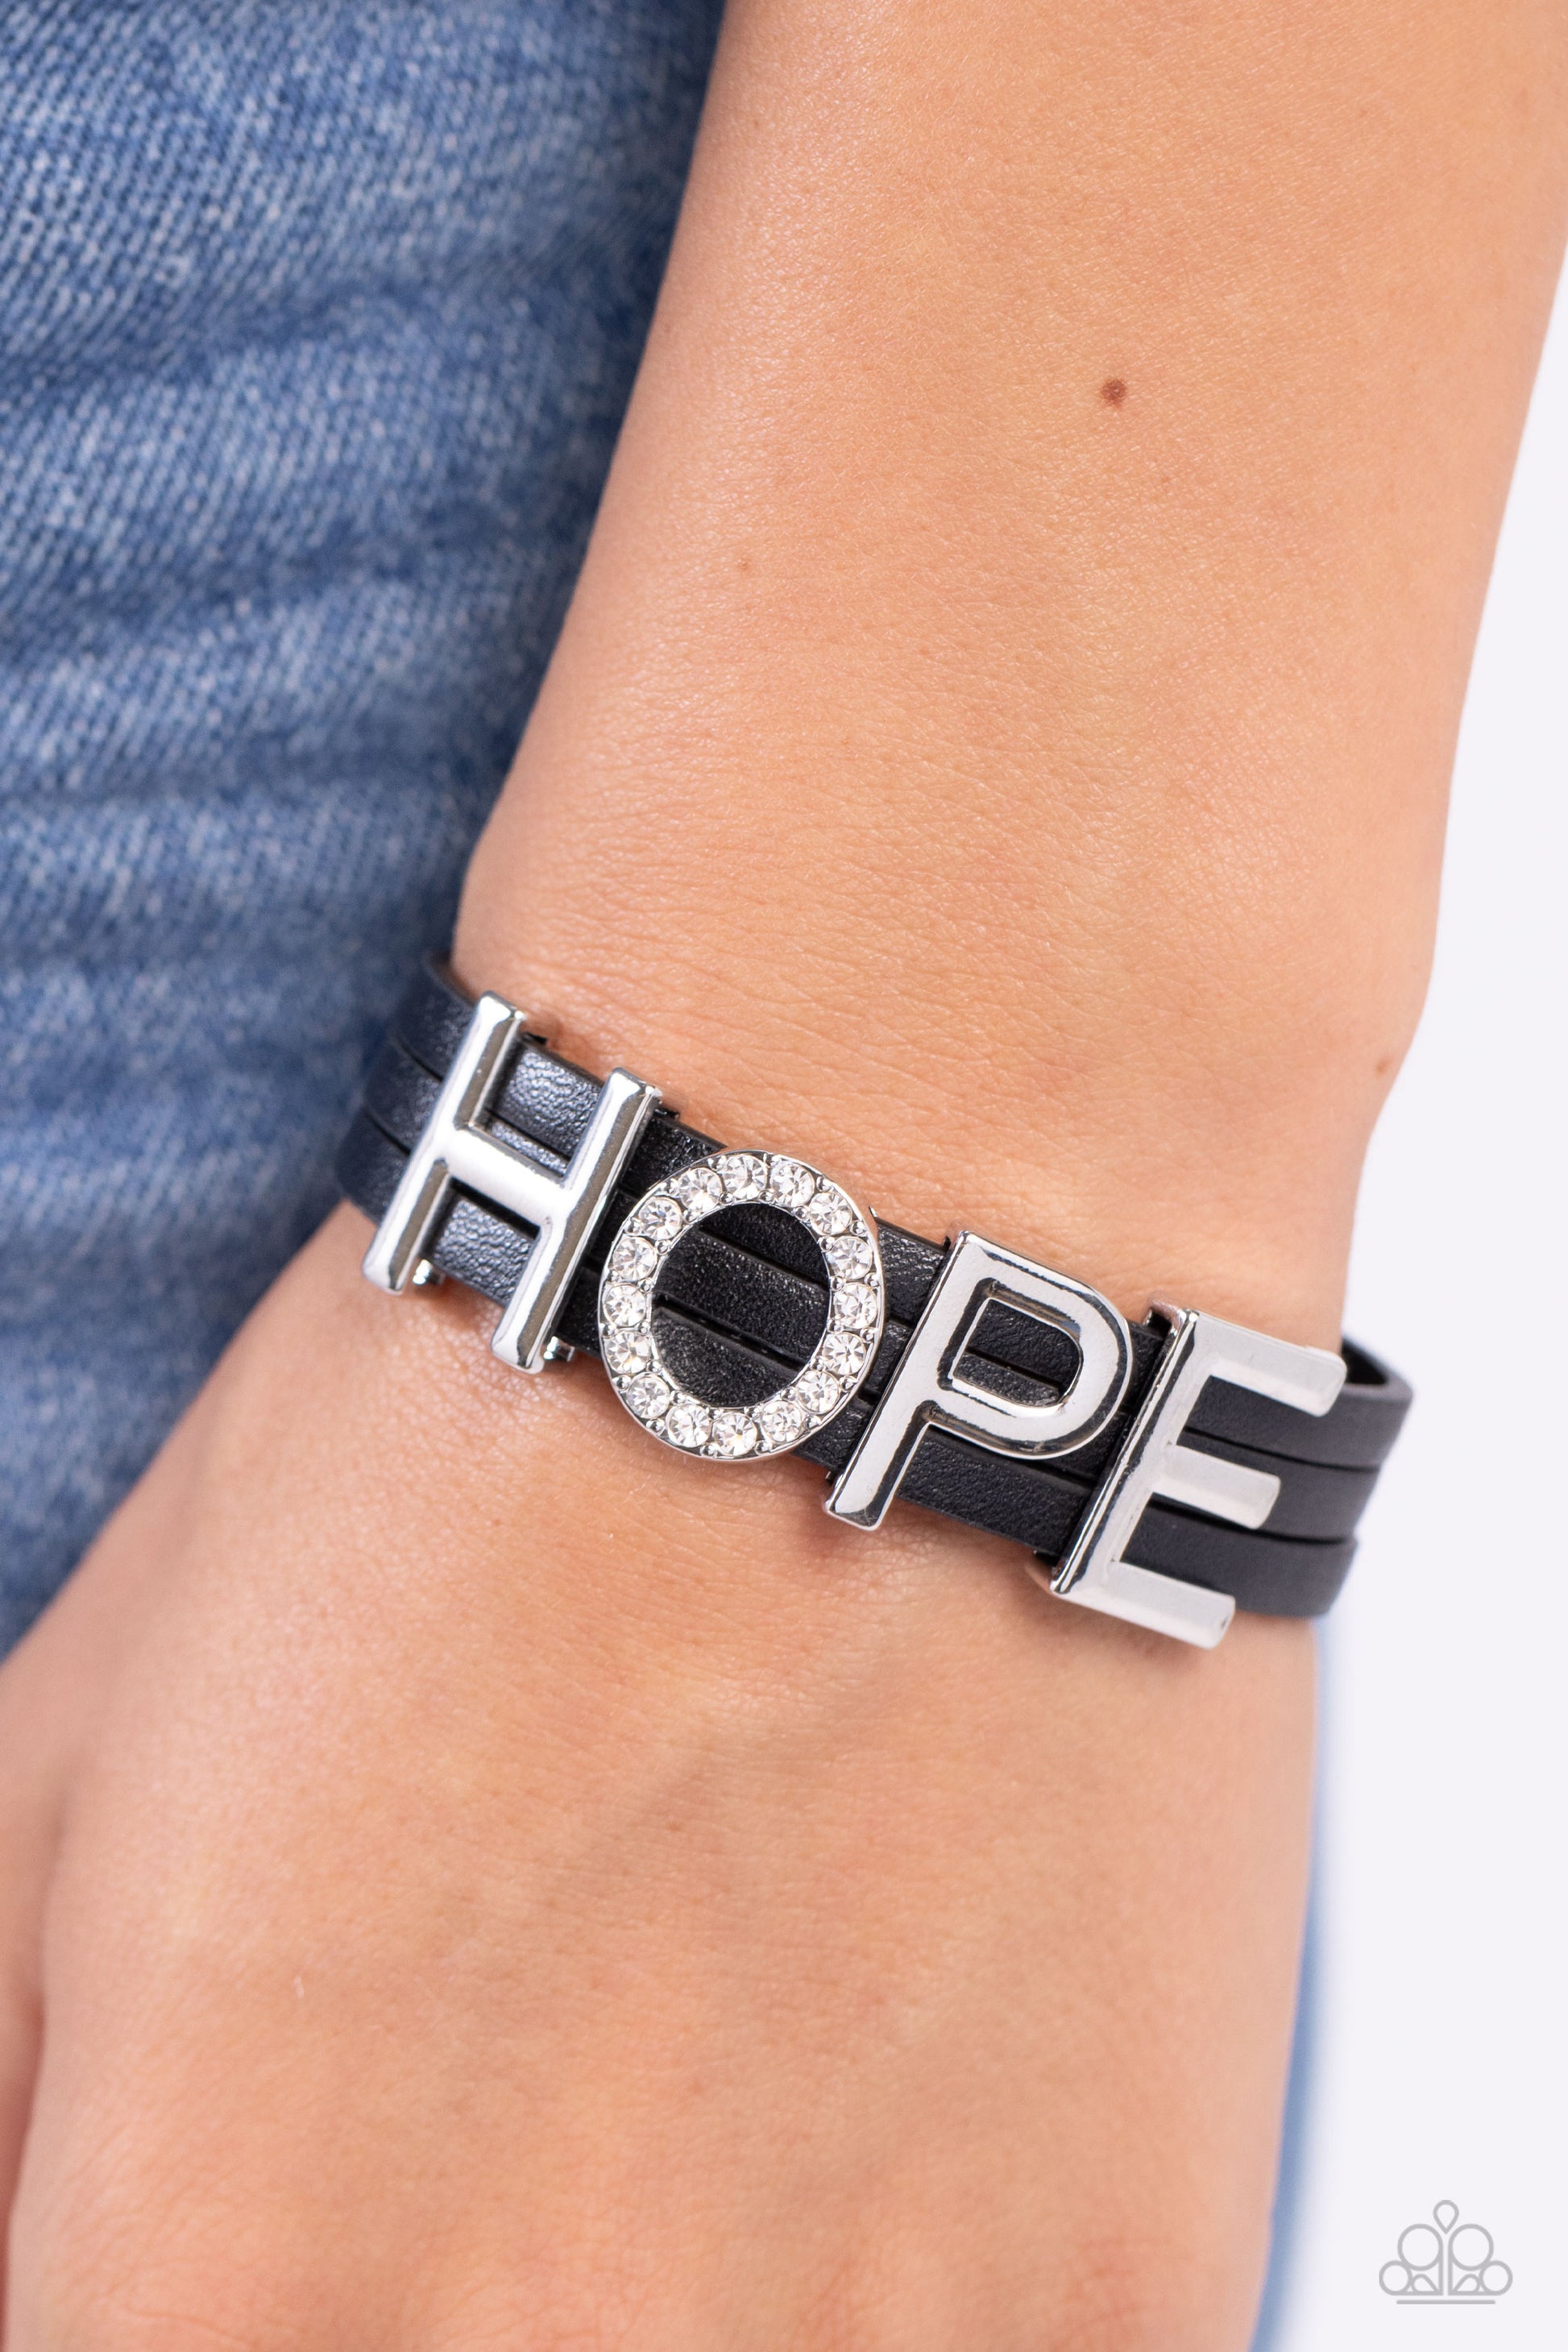 Hopeful Haute Black Wrap Bracelet - Paparazzi Accessories  Threaded along layers of black leather strands, glistening silver letters form the word "HOPE" with the "O" embossed in white rhinestones for a dazzling statement. Features a magnetic closure.  Sold as one individual bracelet.  SKU: P9SE-BKXX-345XX